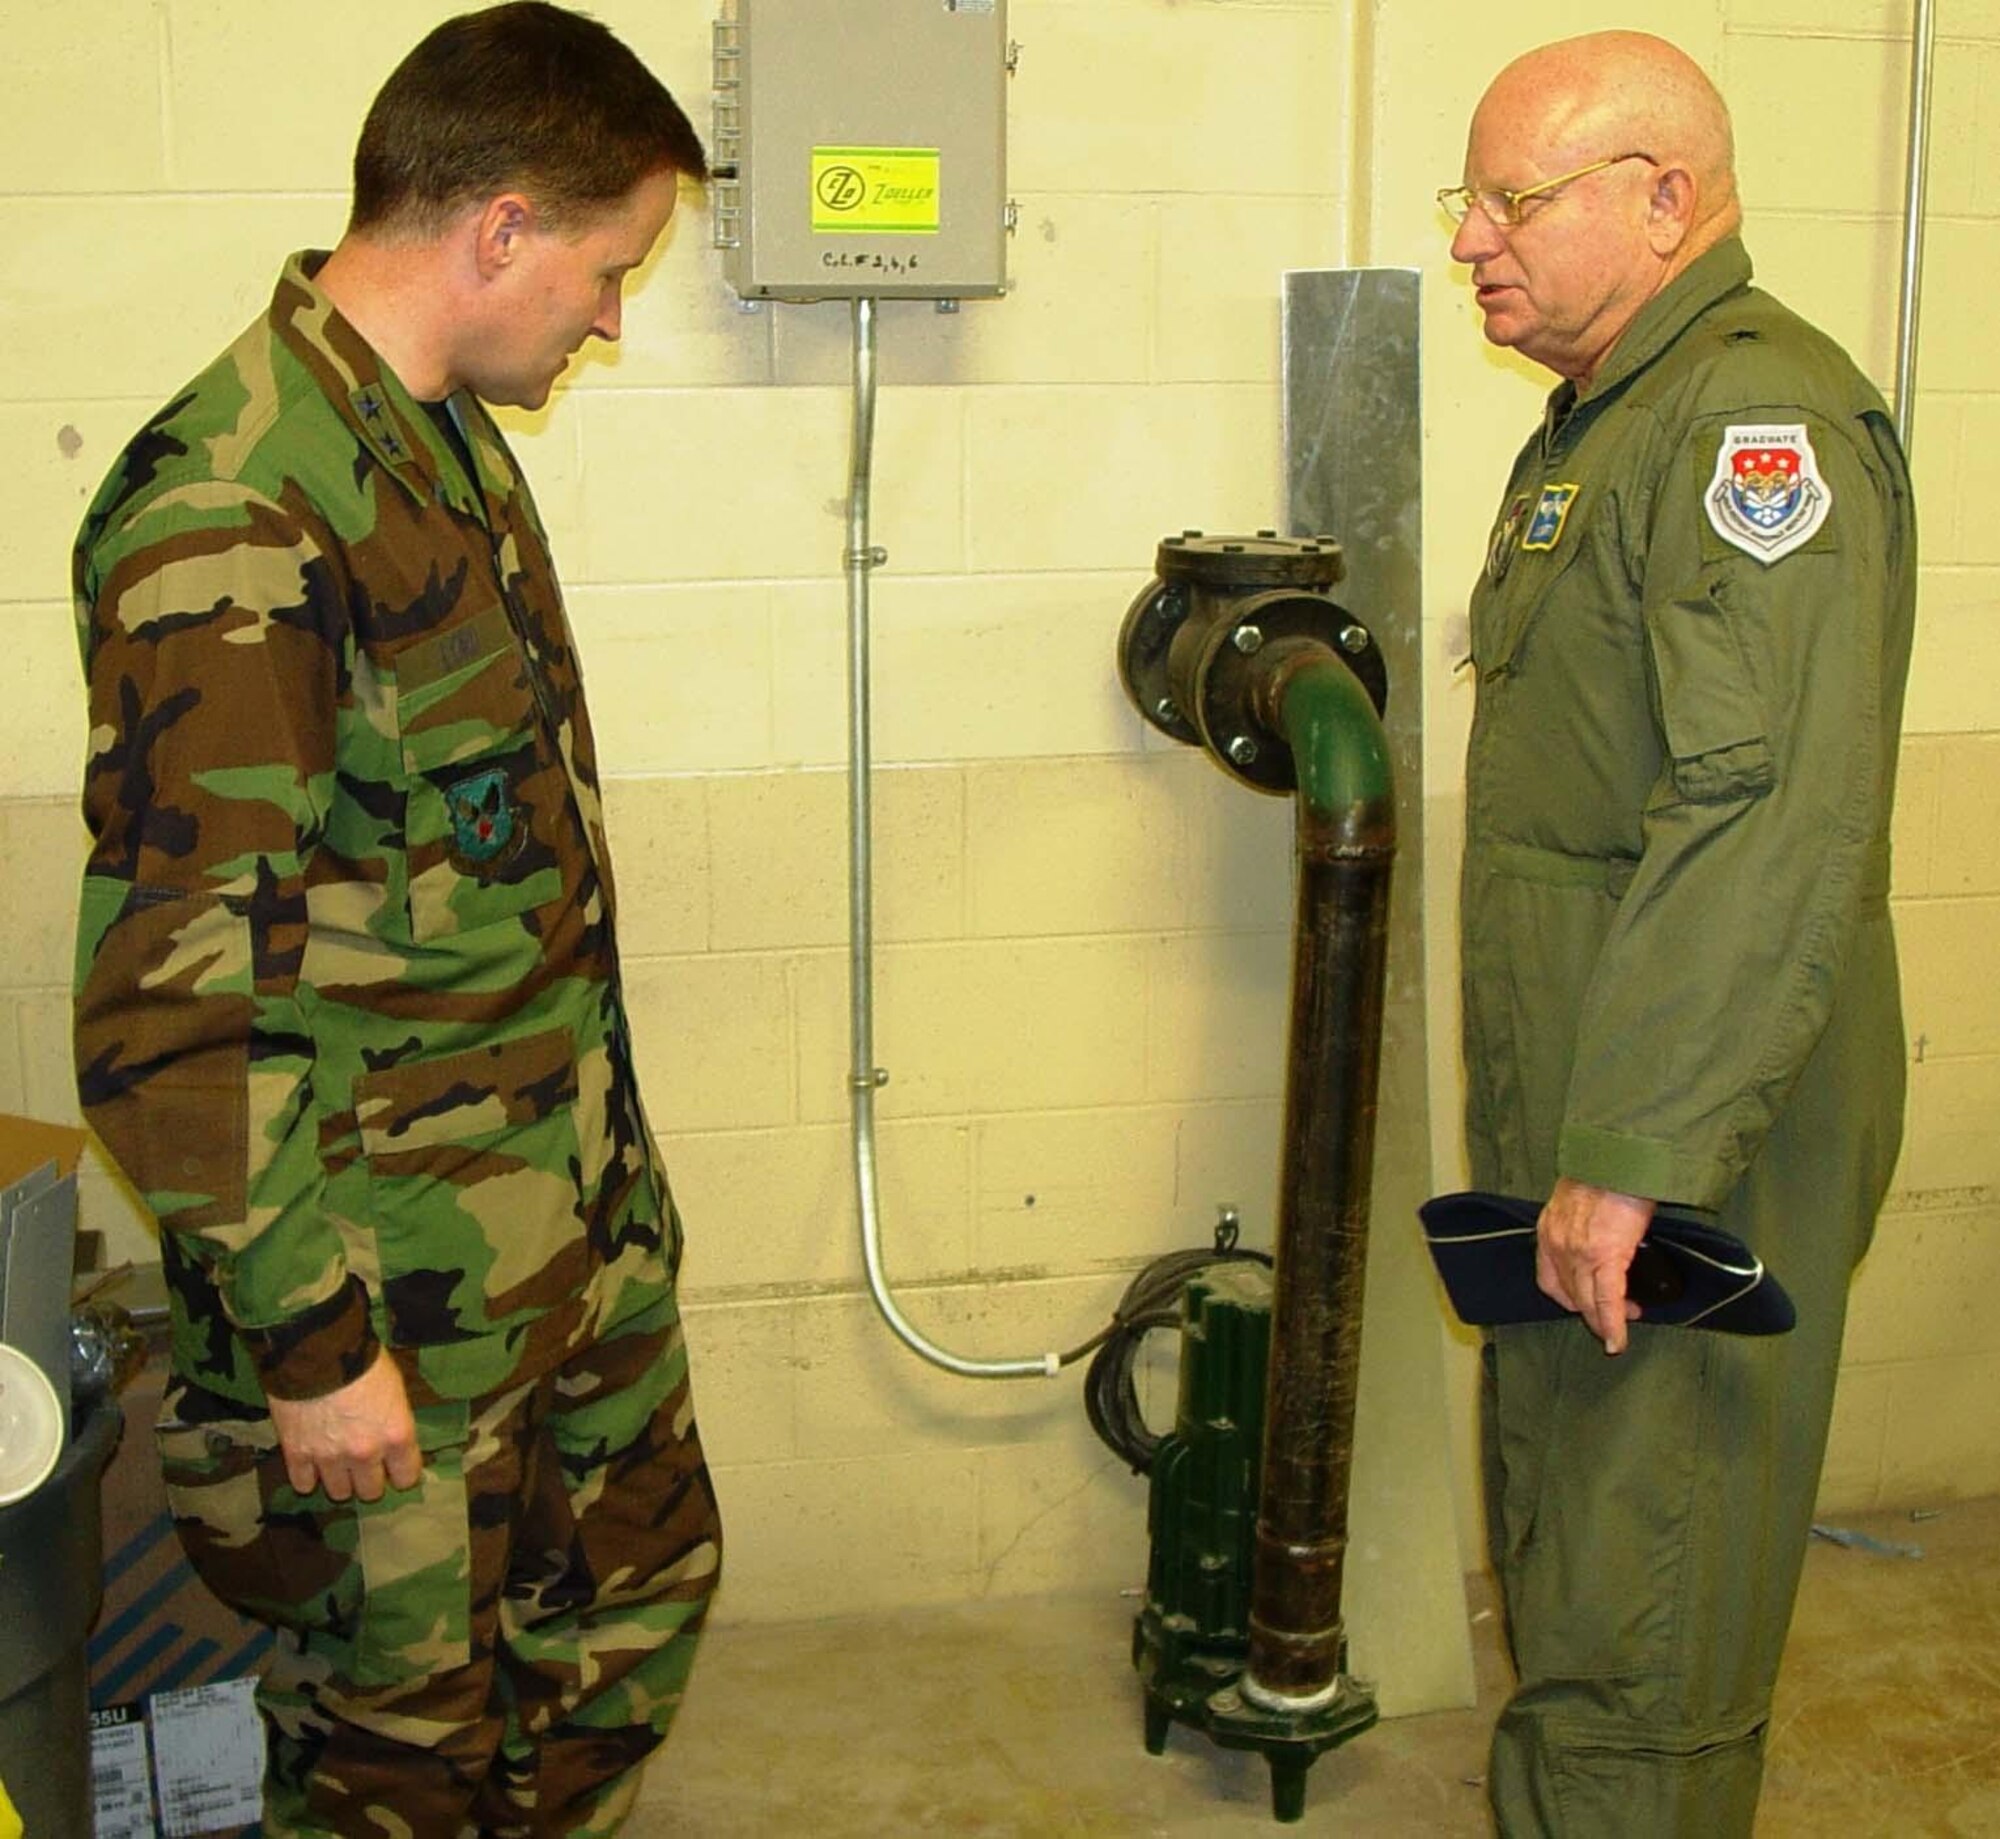 General Lord, left, is shown a sump pump installed in Keesler Medical Center’s generator room by Brig. Gen. (Dr.) James Dougherty, 81st Medical Group commander. General Lord was the 81st Training Wing commander when Hurricane Katrina struck Keesler Aug. 29, 2005. Several sump pumps have been installed in critical areas of the medical center basement as part of flood mitigation efforts to prevent a recurrence of damage similar to what Katrina inflicted on the facility. (U.S. Air Force photo by Steve Pivnick)